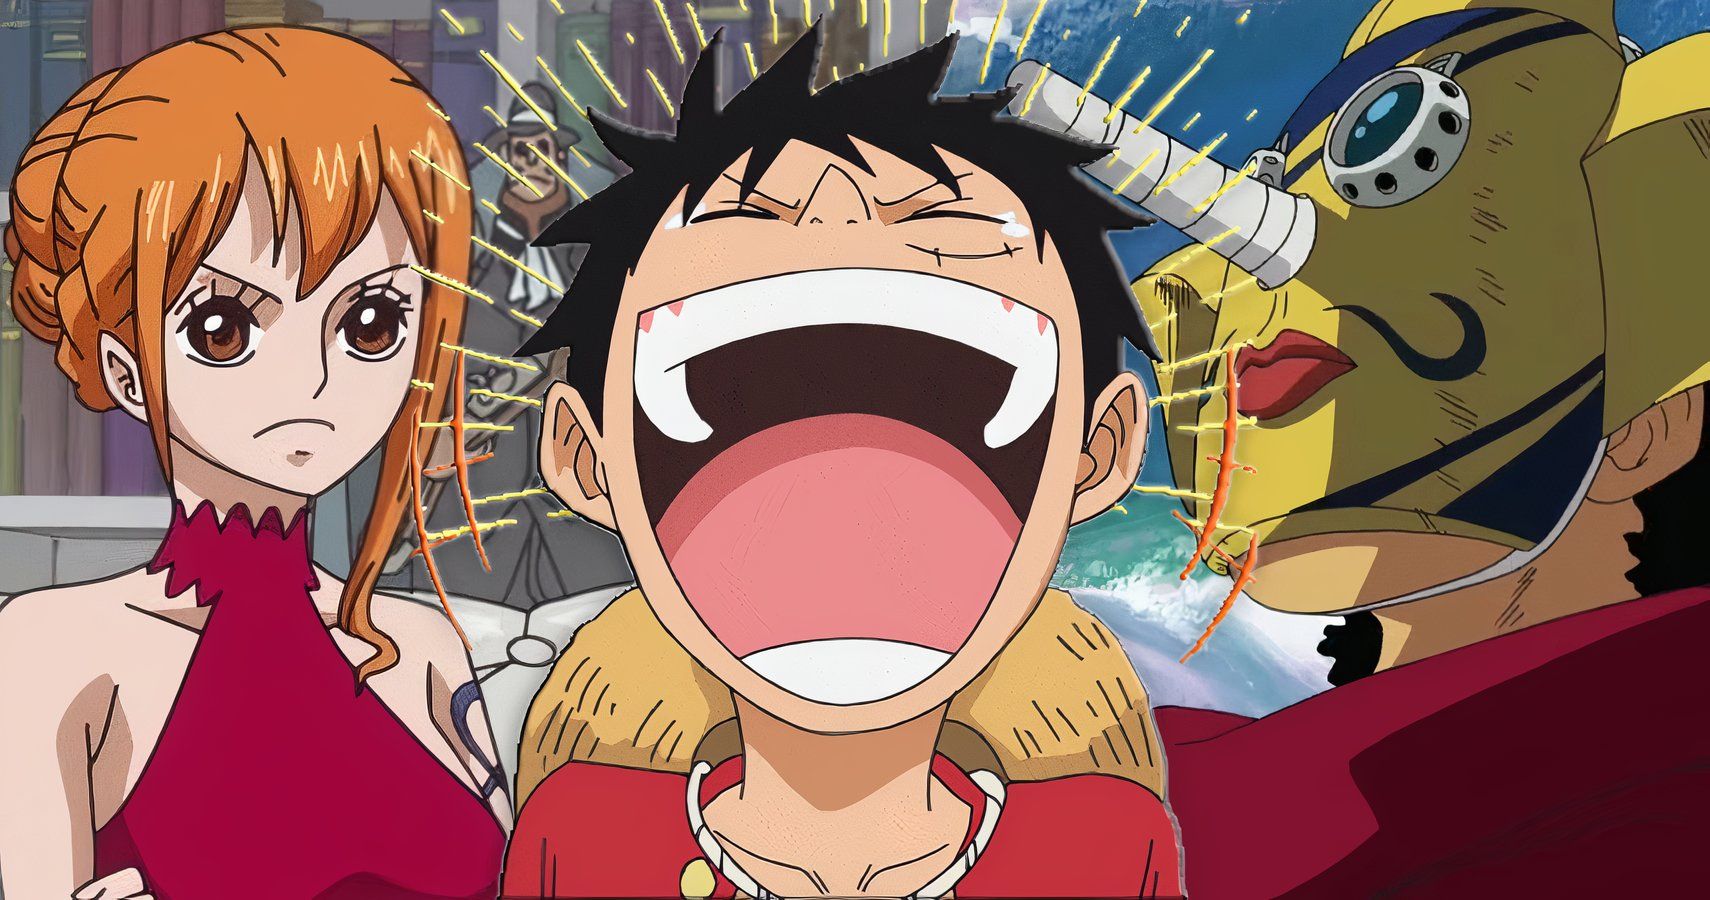 Nami, Luffy laughing, and the Sniper King from One Piece